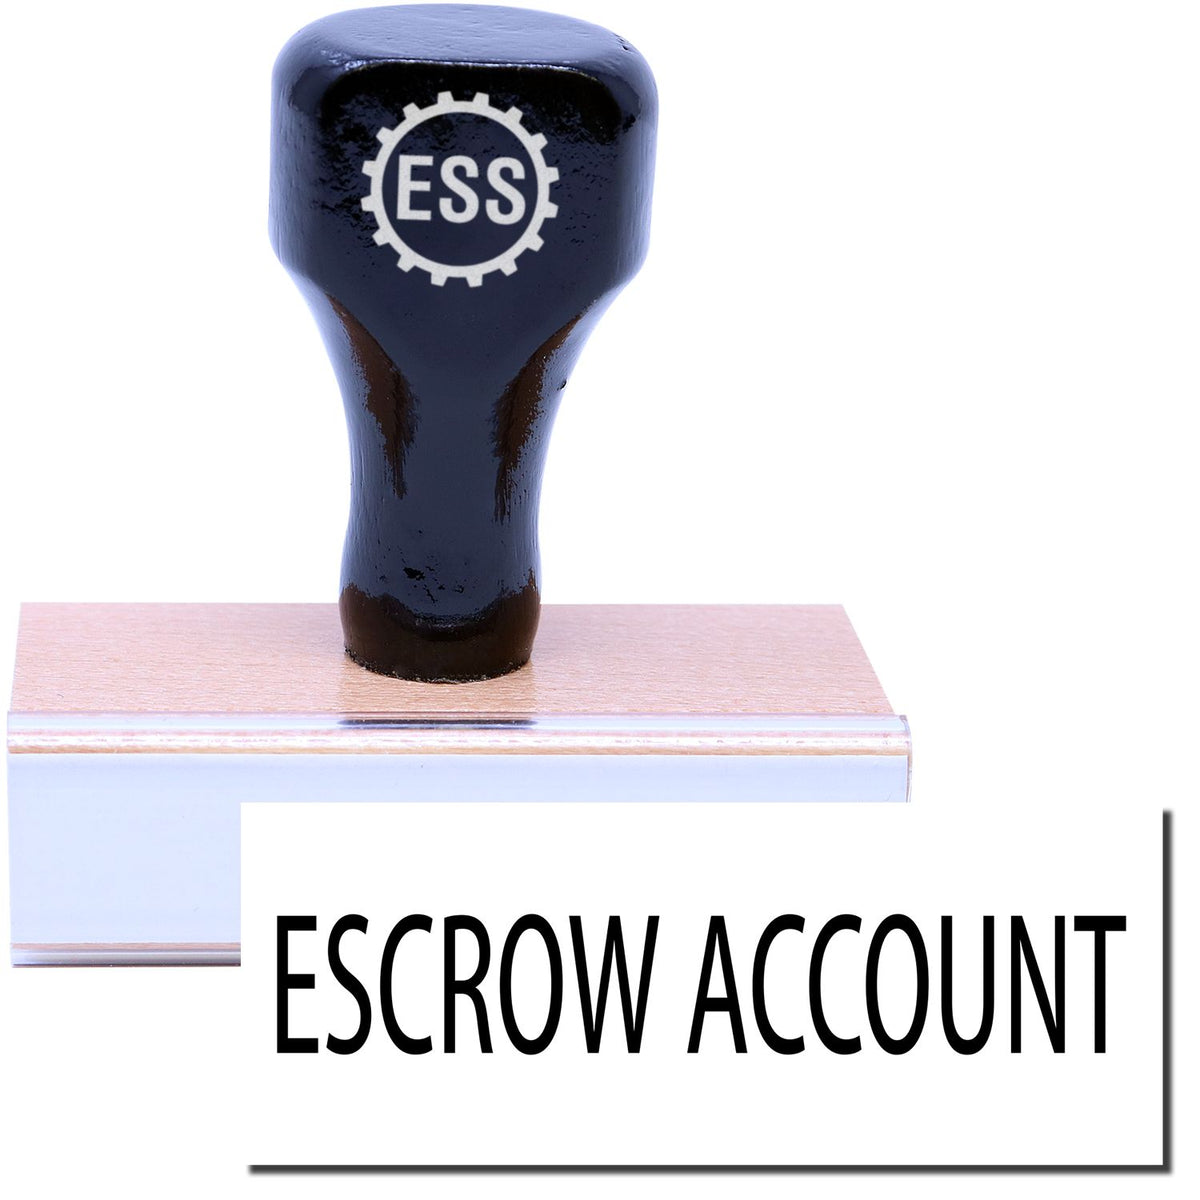 A stock office rubber stamp with a stamped image showing how the text &quot;ESCROW ACCOUNT&quot; is displayed after stamping.